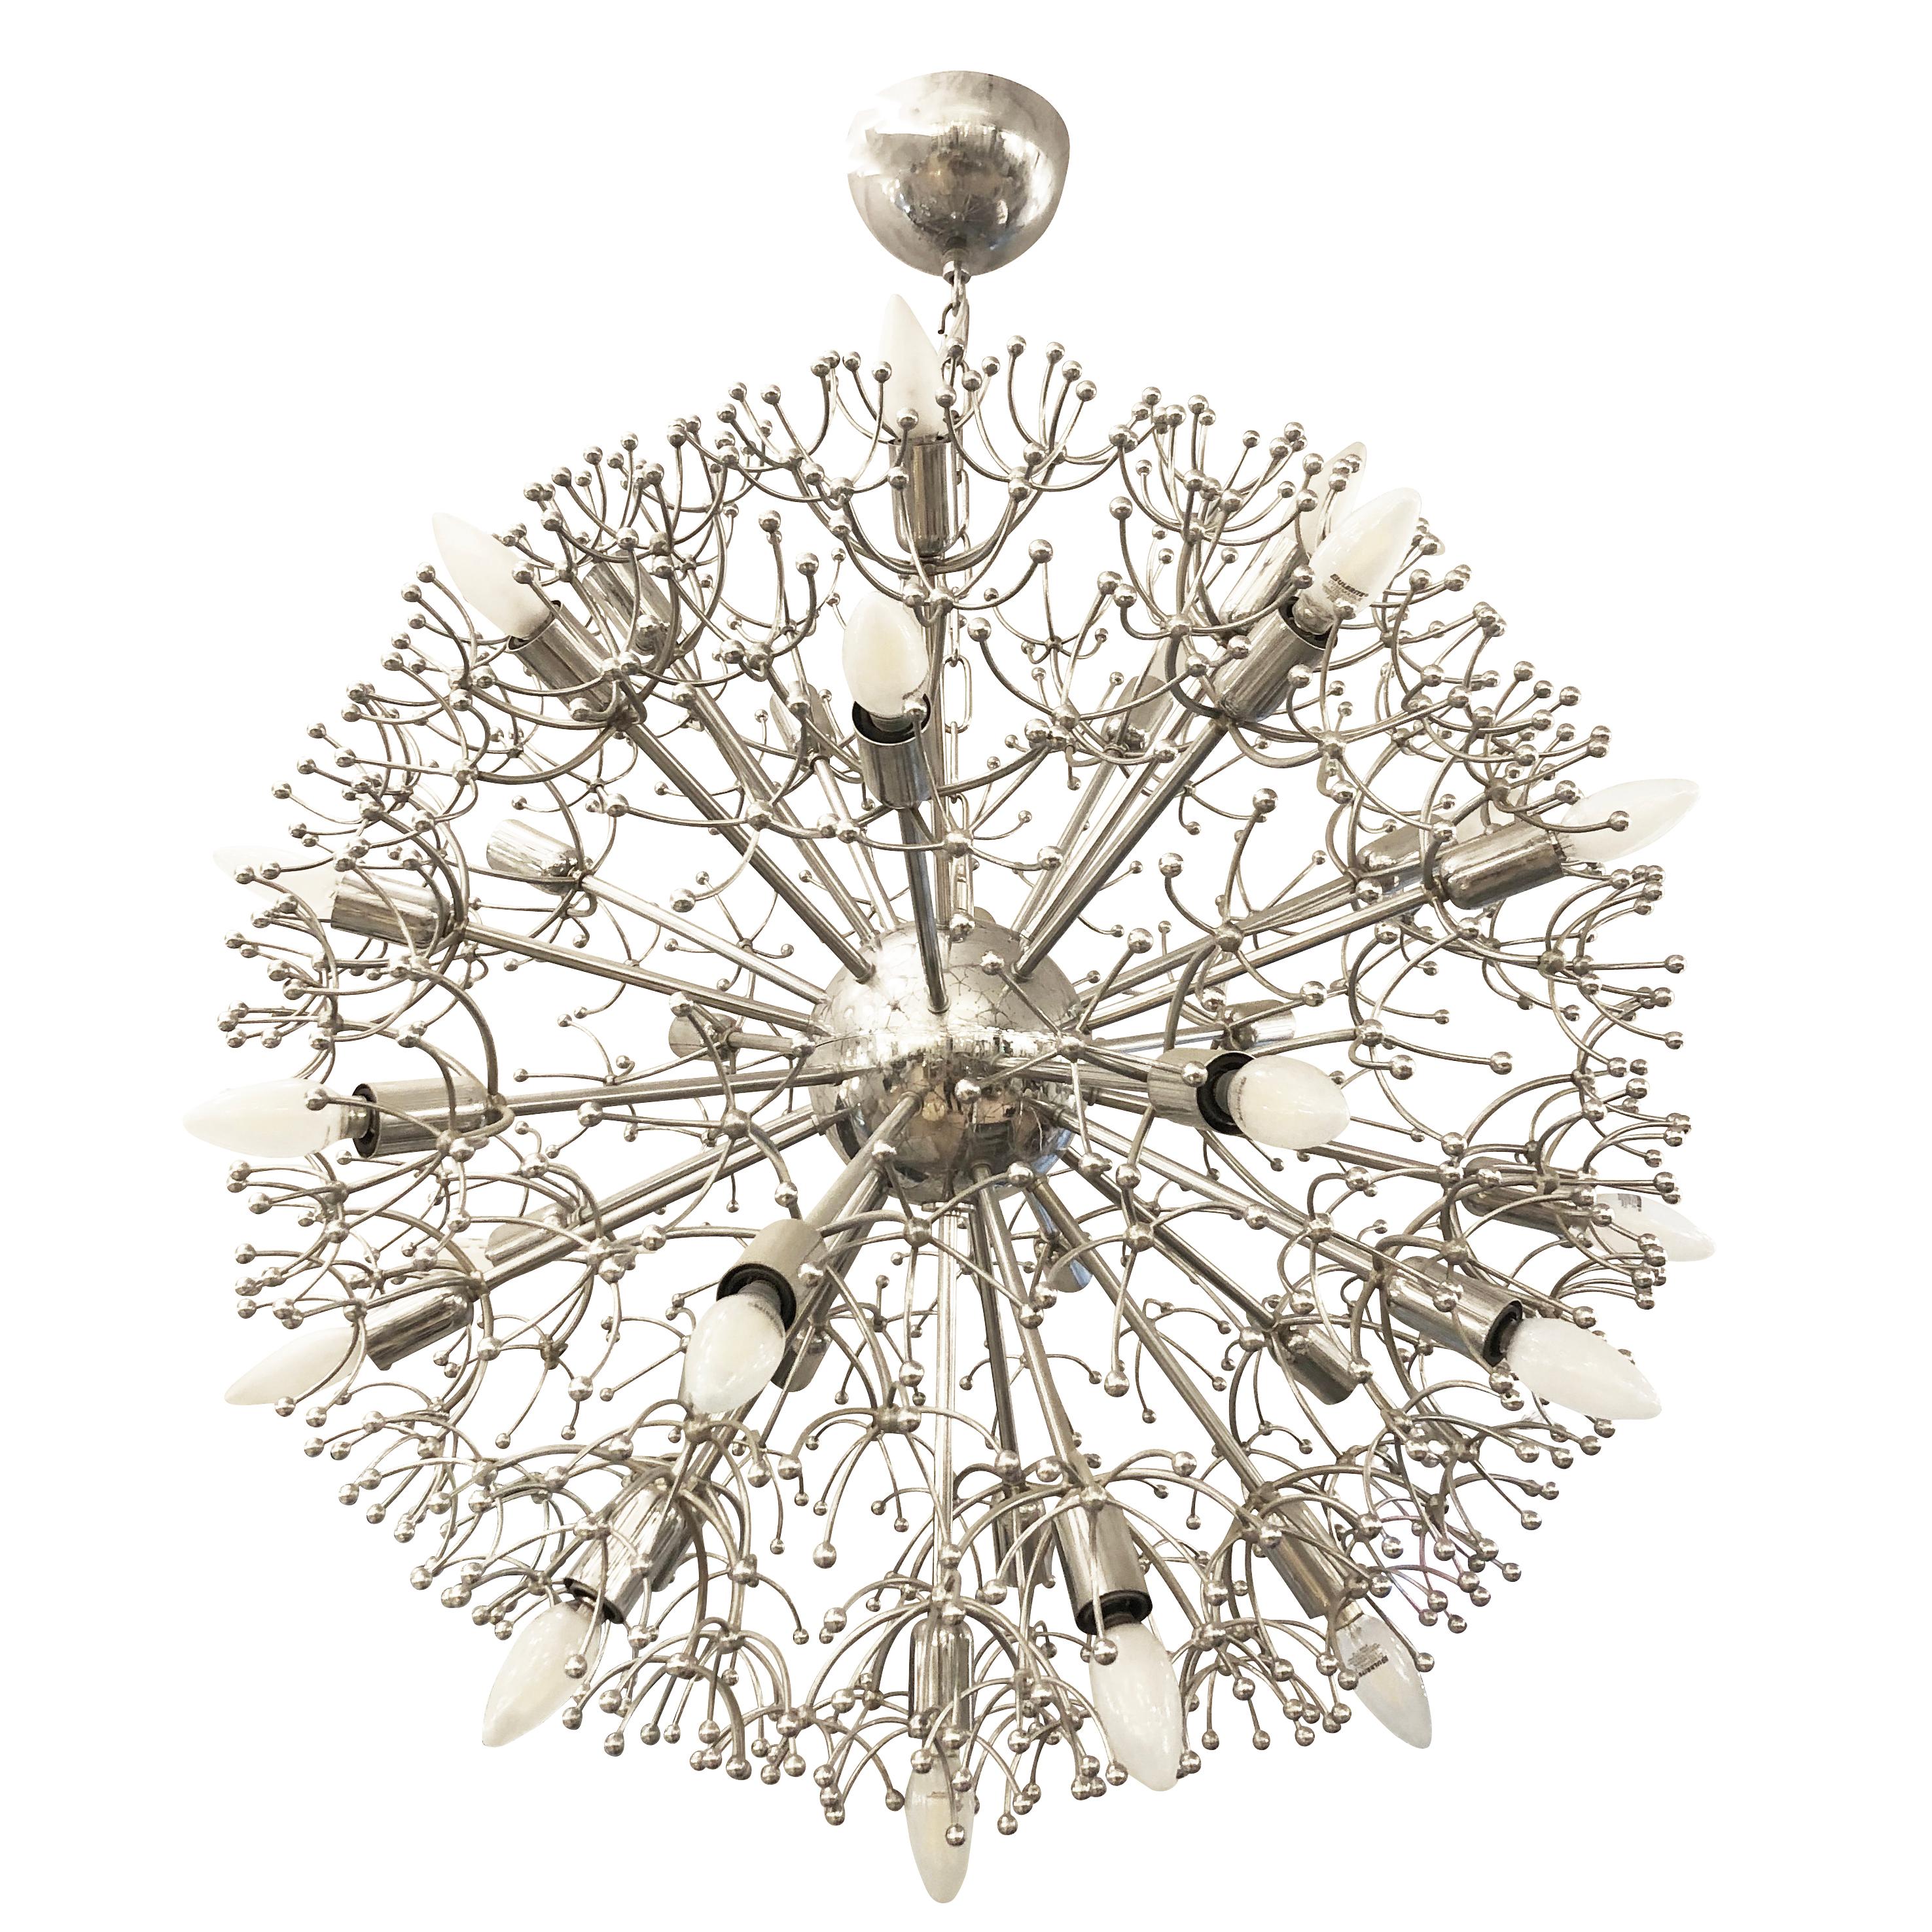 Chrome starburst Sputnik chandelier by Sciolari with 20 lights. Length of chain can be adjusted as needed.

Condition: Good vintage condition, minor wear consistent with age and use. Requires rewiring 

Measures: Diameter 30”

Height 38”.

  